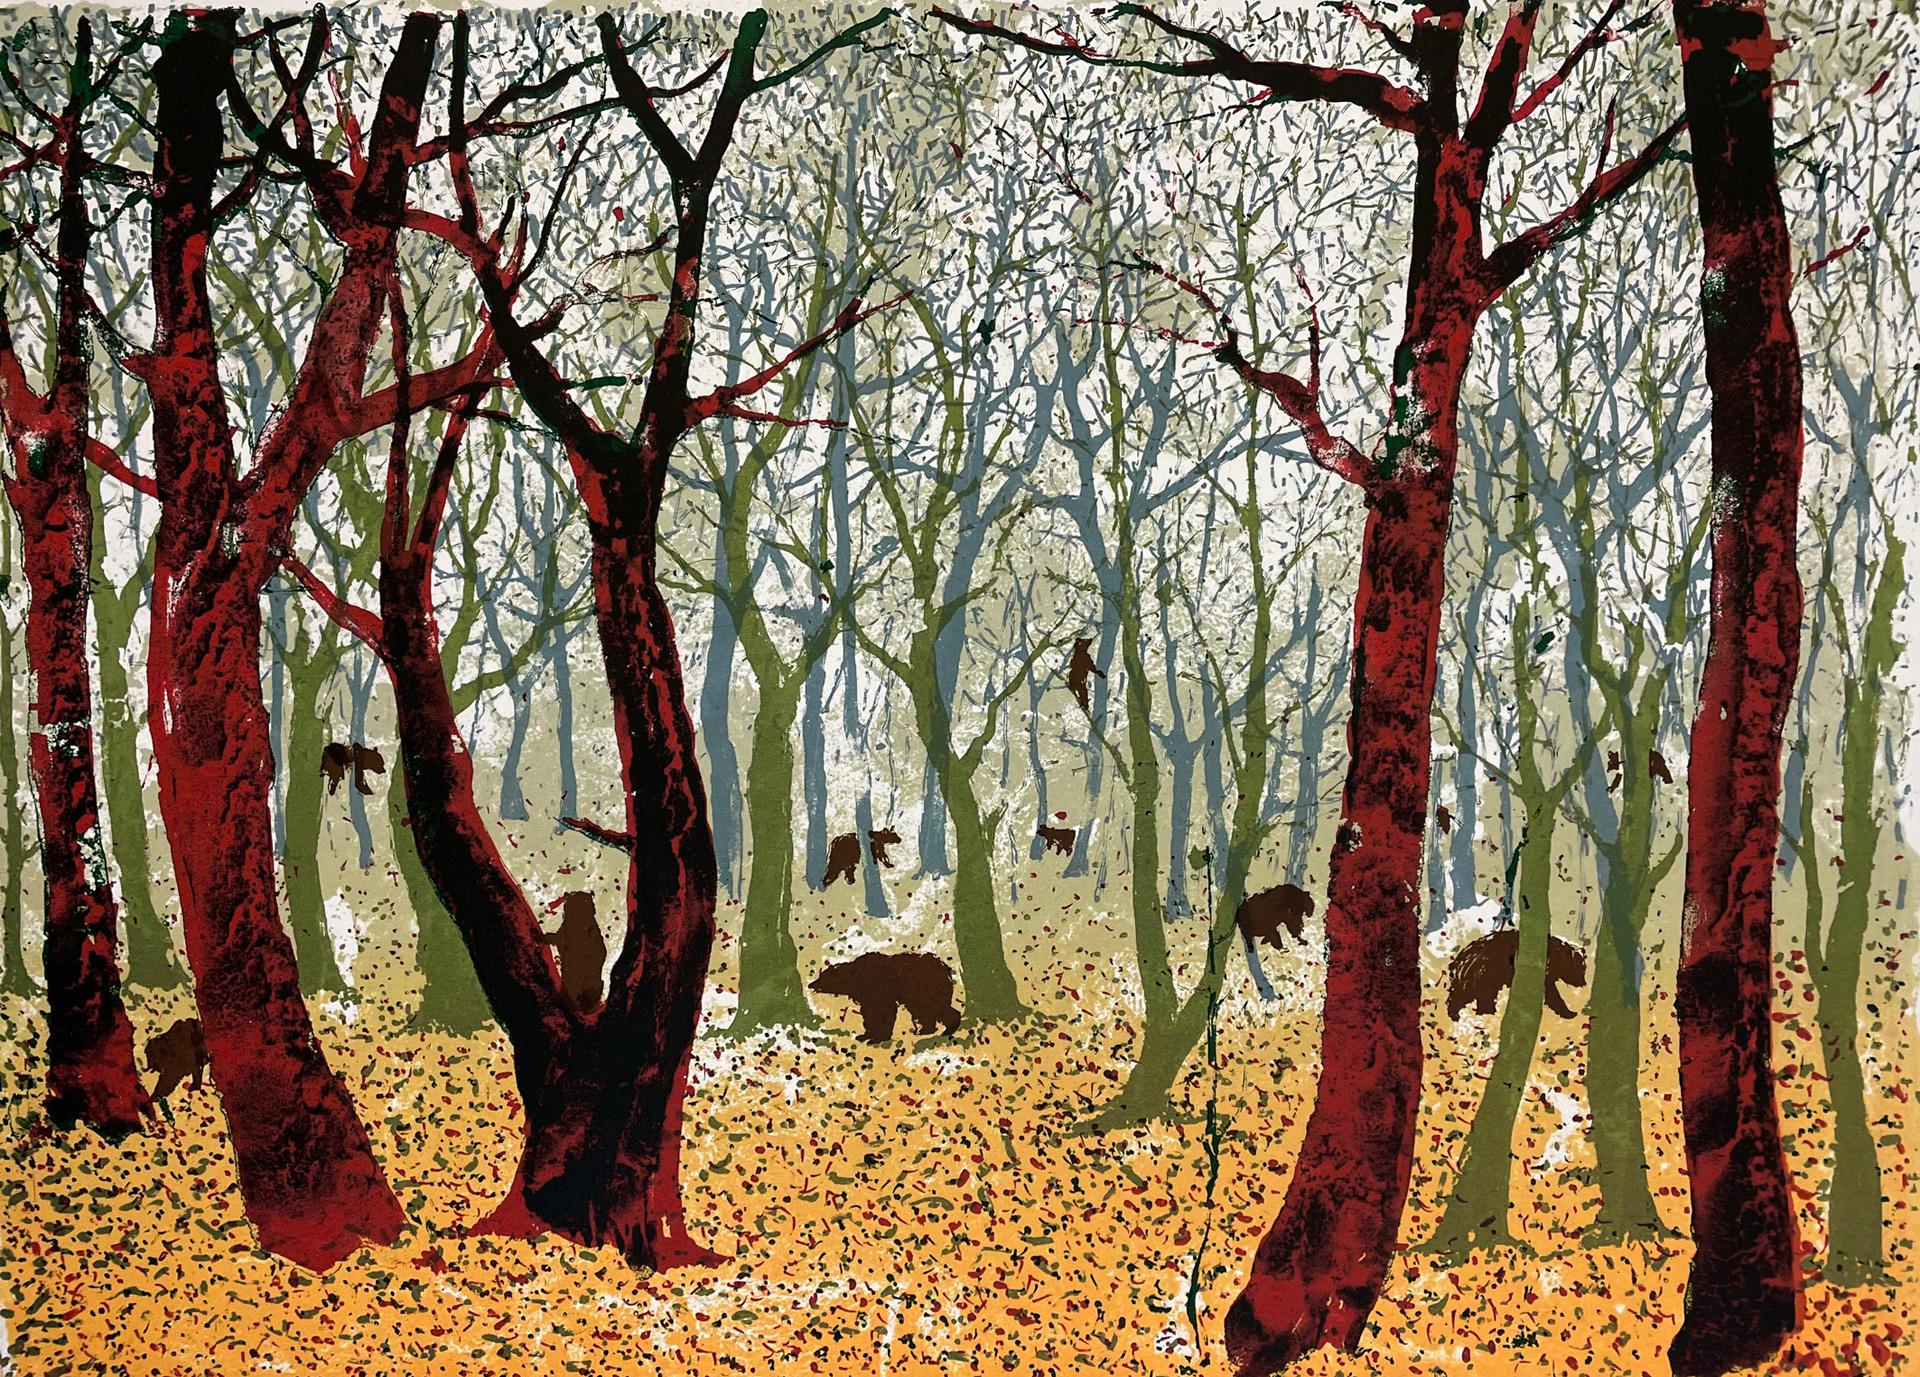 Bears in the Woods, impression d'art, chiens, animaux, folklore, art bleu abordable en vente 1